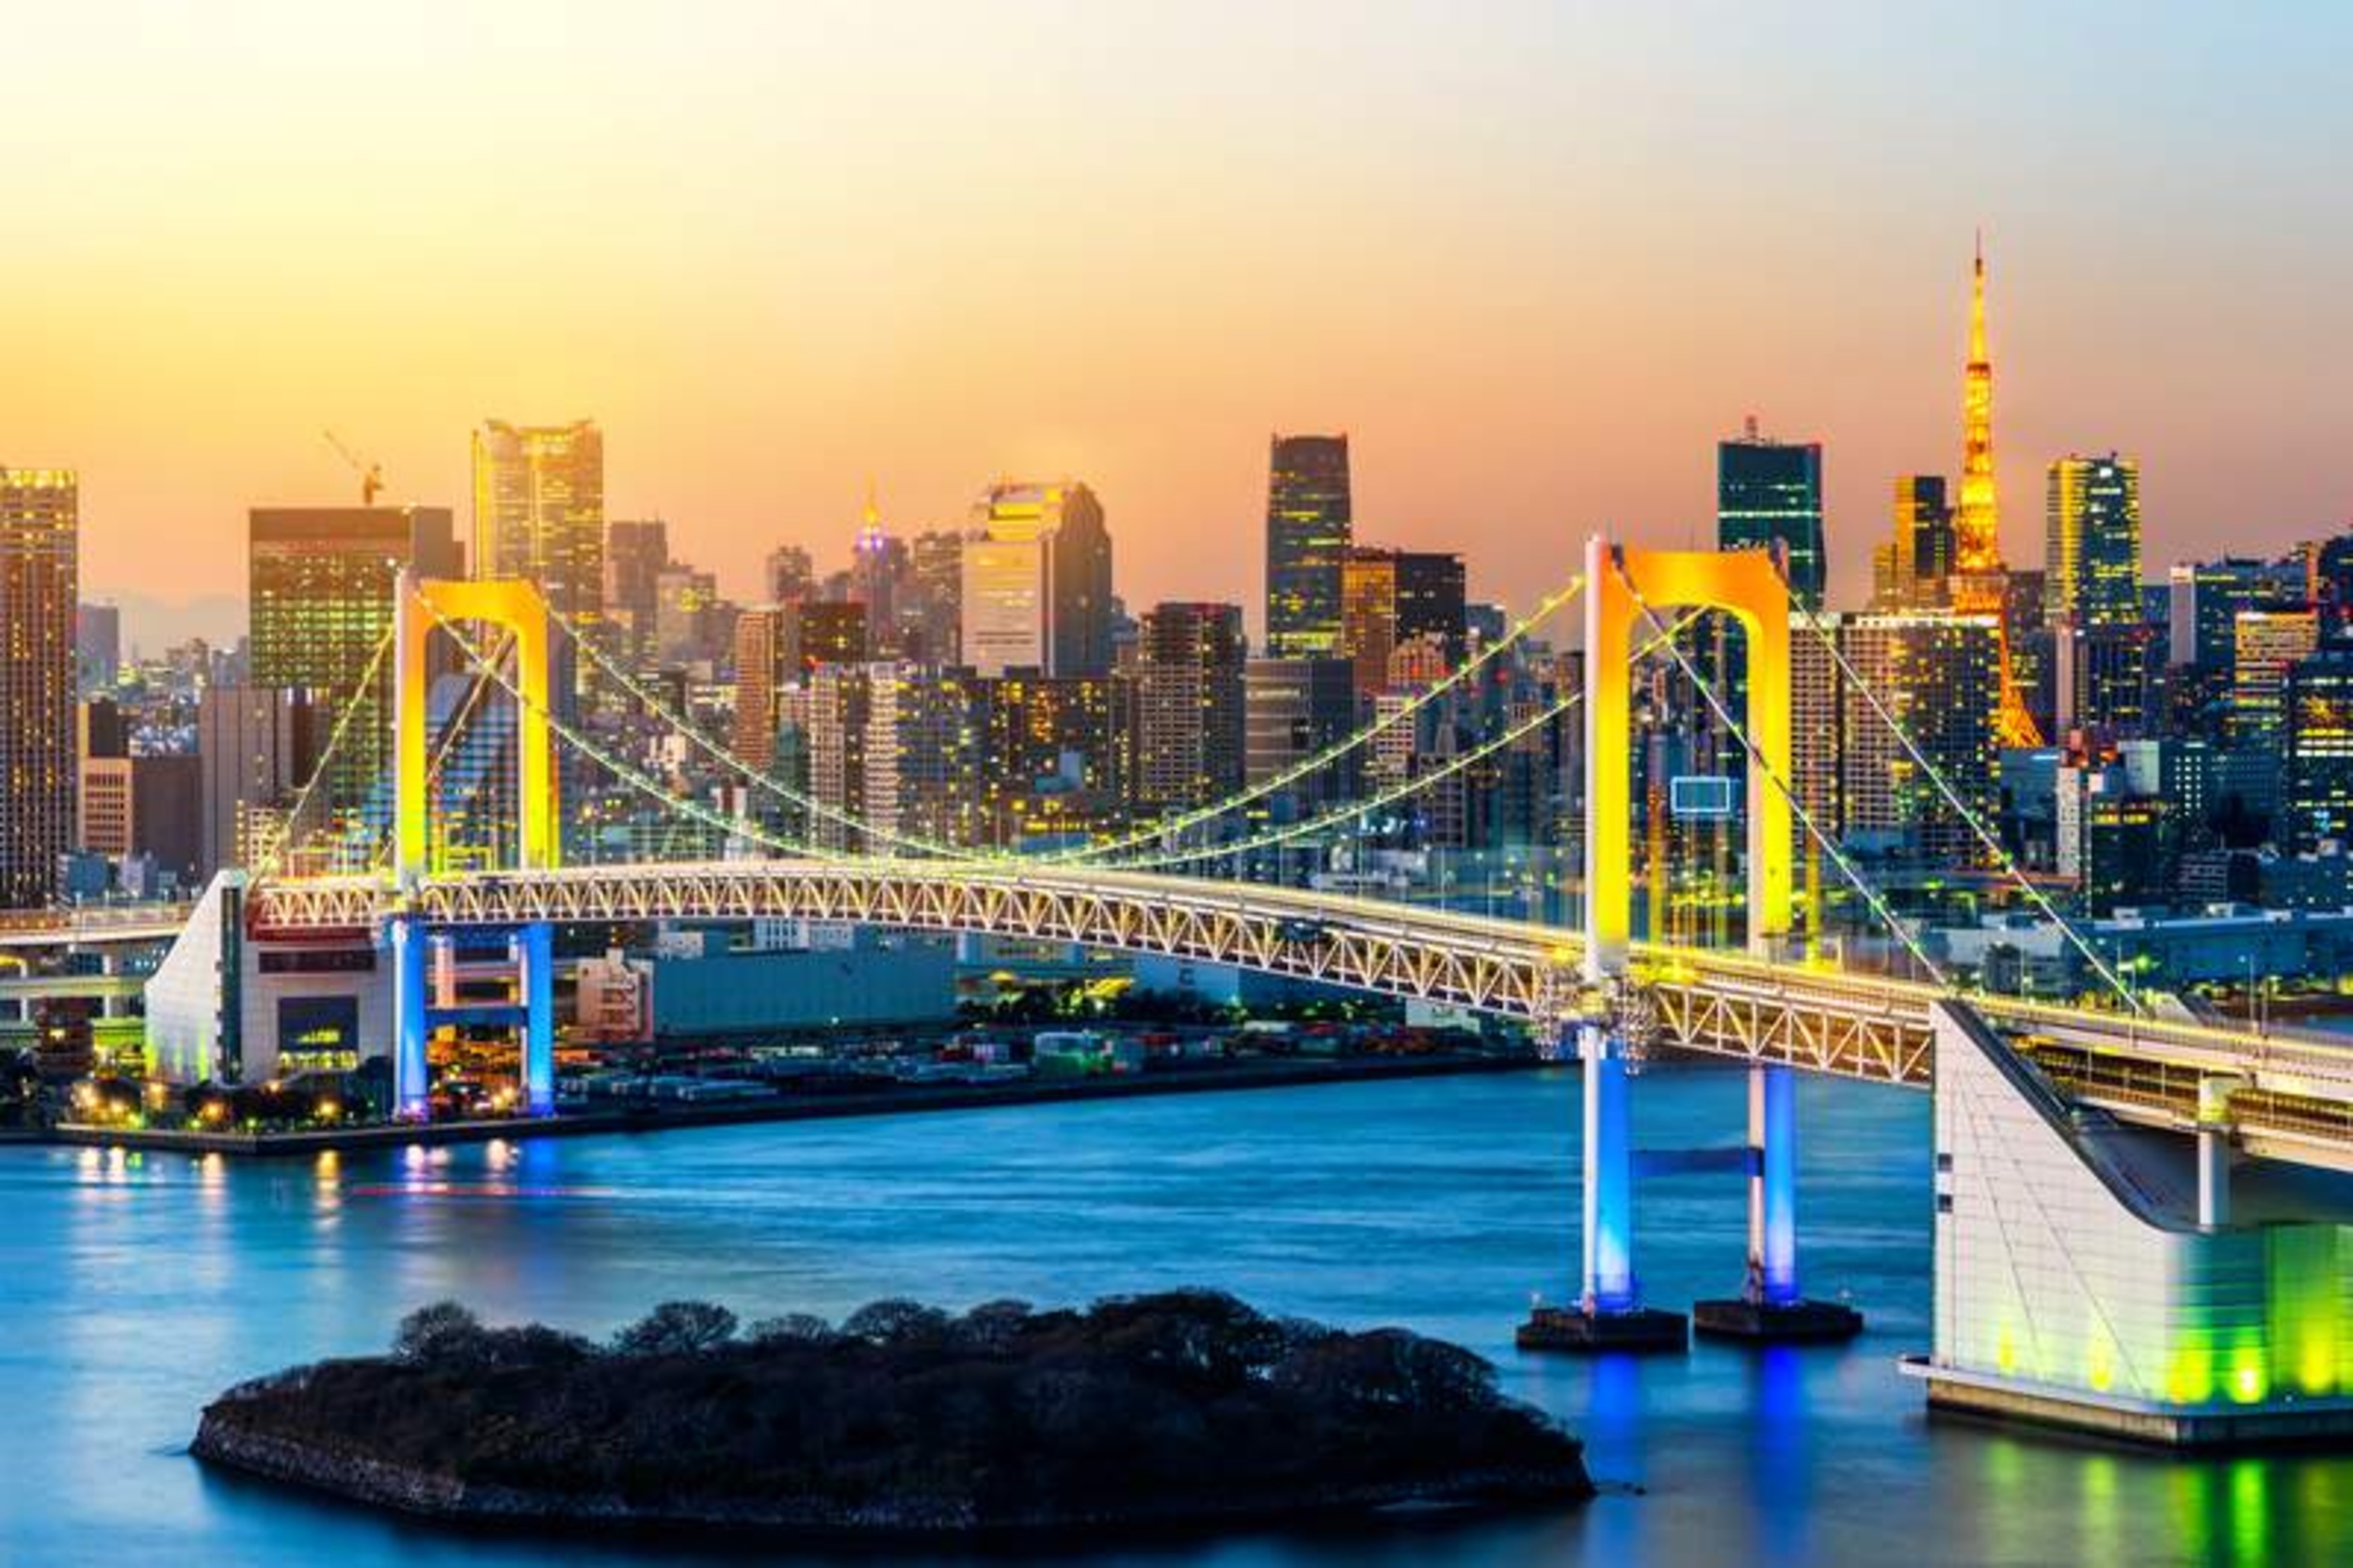 <p>Take a barge out to sea and marvel at the Tokyo skyline. During the warm season, these open-door ships take you to several viewpoints while food and sake are delivered to your table. </p><p><a href='https://www.msn.com/en-us/community/channel/vid-cj9pqbr0vn9in2b6ddcd8sfgpfq6x6utp44fssrv6mc2gtybw0us'>Follow us on MSN to see more of our exclusive lifestyle content.</a></p>